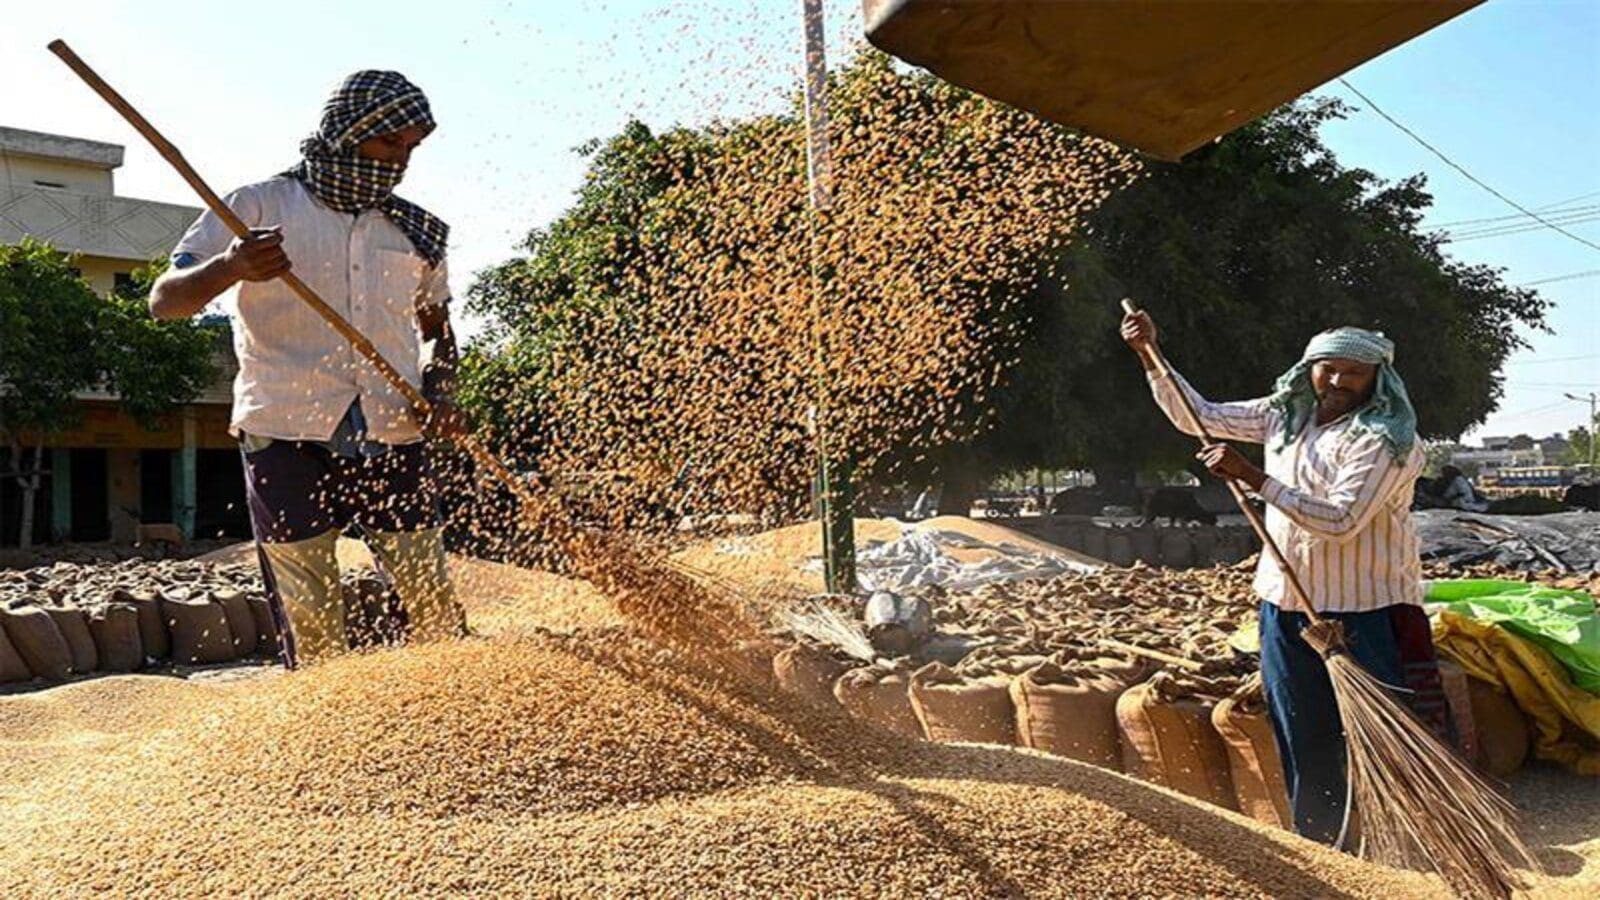 Egypt embarks on local wheat procurement, targets 3.5M tonnes